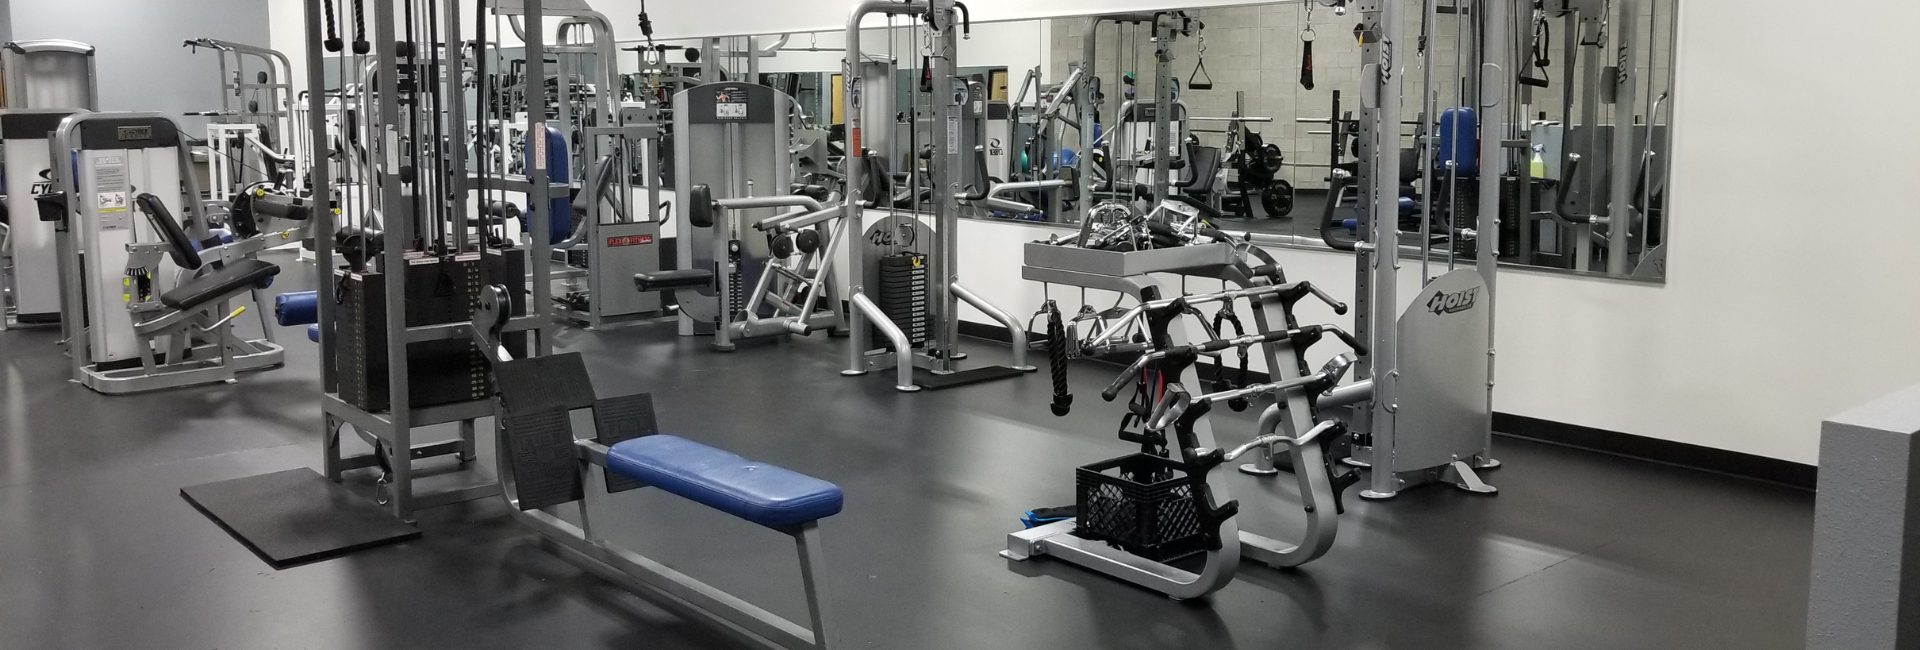 cable machines for circuit training in a ventana albuquerque gym